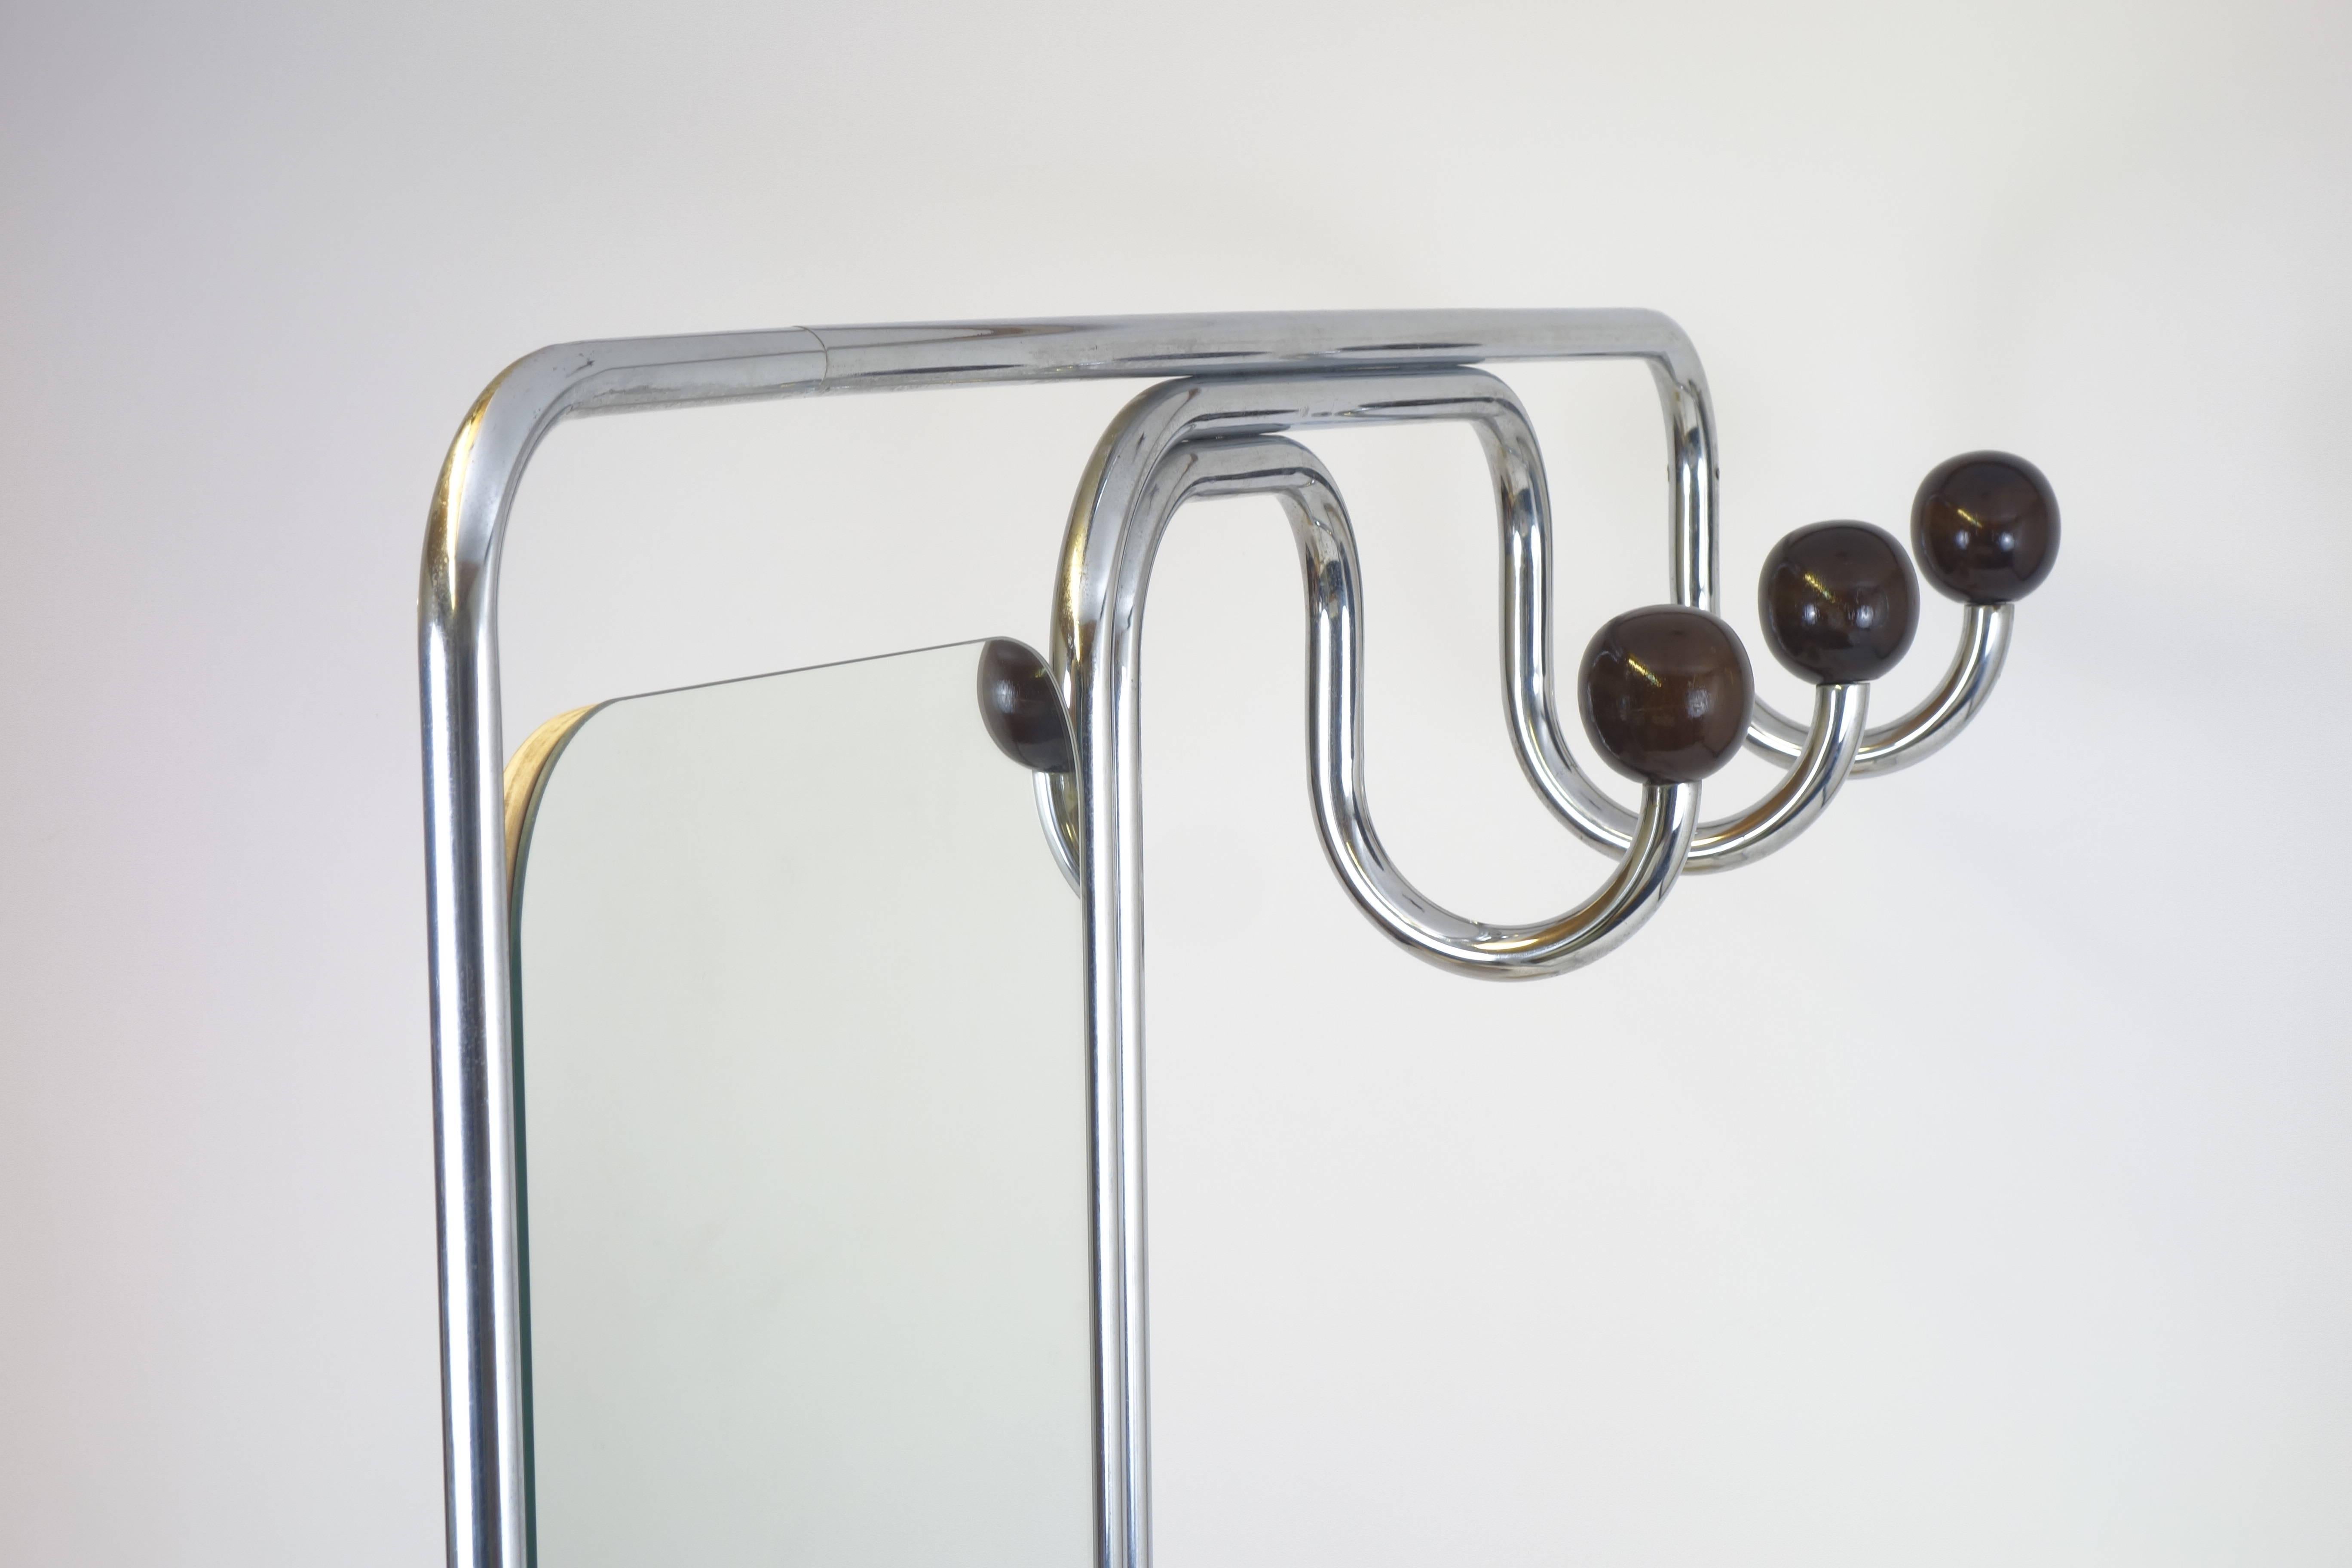 A coat and hat rack reduced to its essentials in the Bauhaus style of the 1930s. This ingeniously minimalist tubular steel concept includes 3 coat hooks with turned beechwood balls, a mirror, a shoe rack and an integrated umbrella stand. Aside from